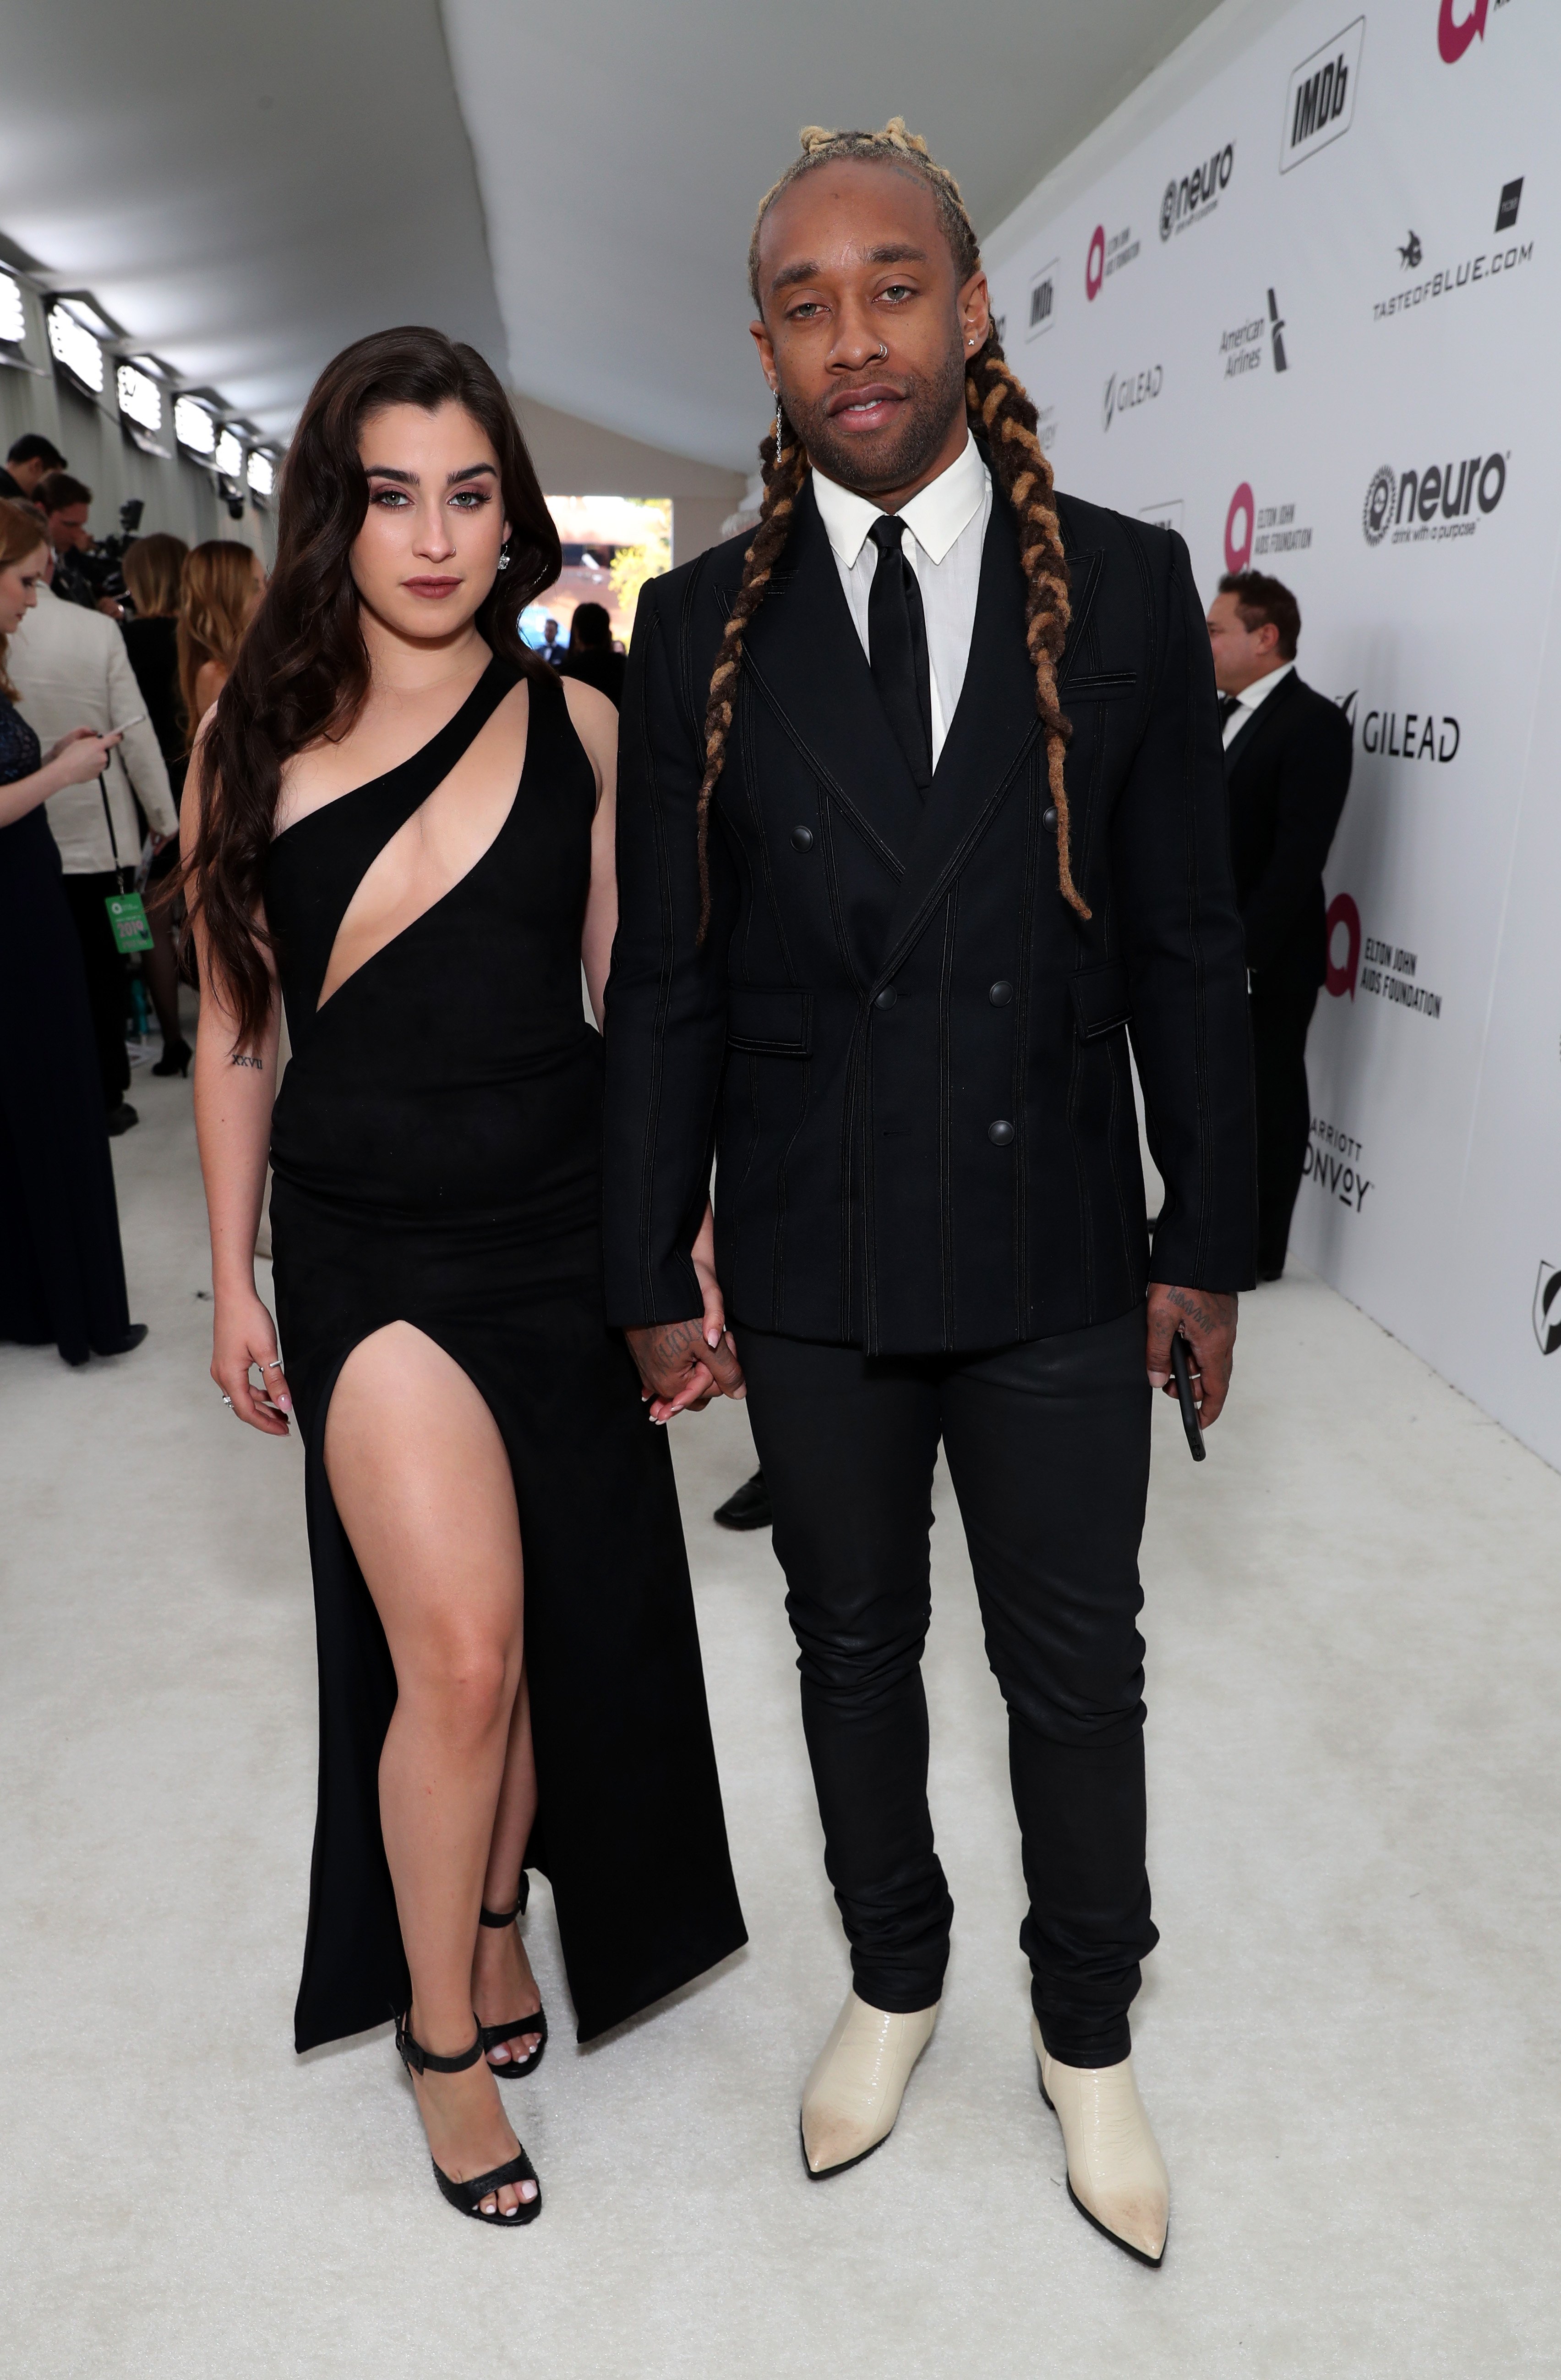 Ty Dolla Sign and Lauren Jauregui at the 27th annual Elton John AIDS Foundation Academy Awards Viewing Party in West Hollywood, California on February 24, 2019 | Source: Getty Images